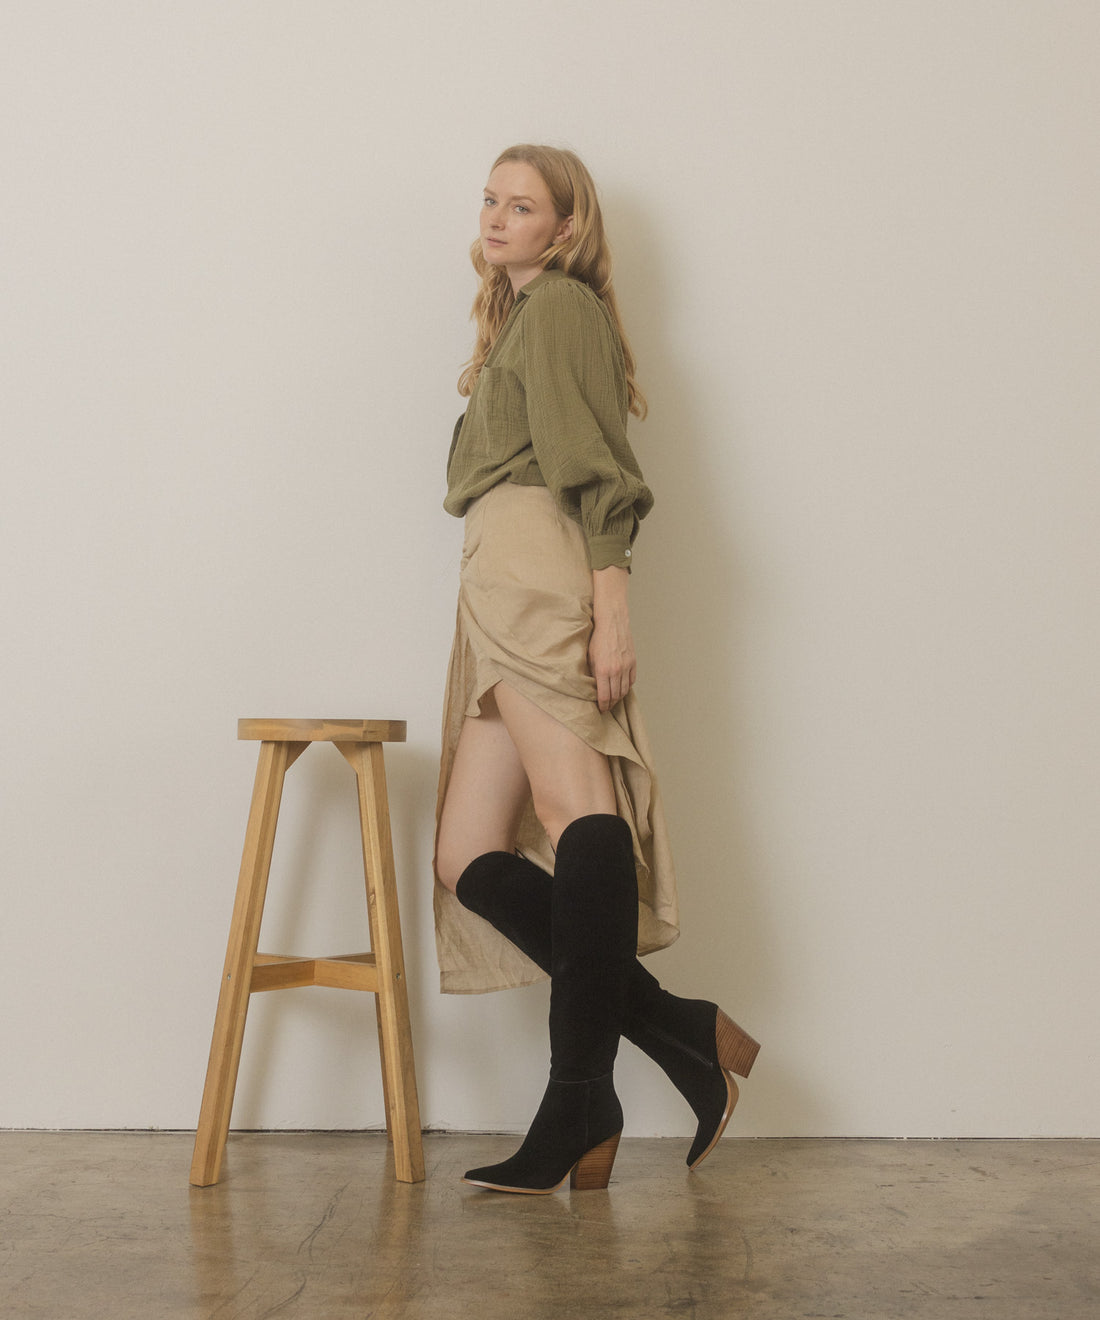 Clara Knee High Western Boots: Black Suede - Bella and Bloom Boutique